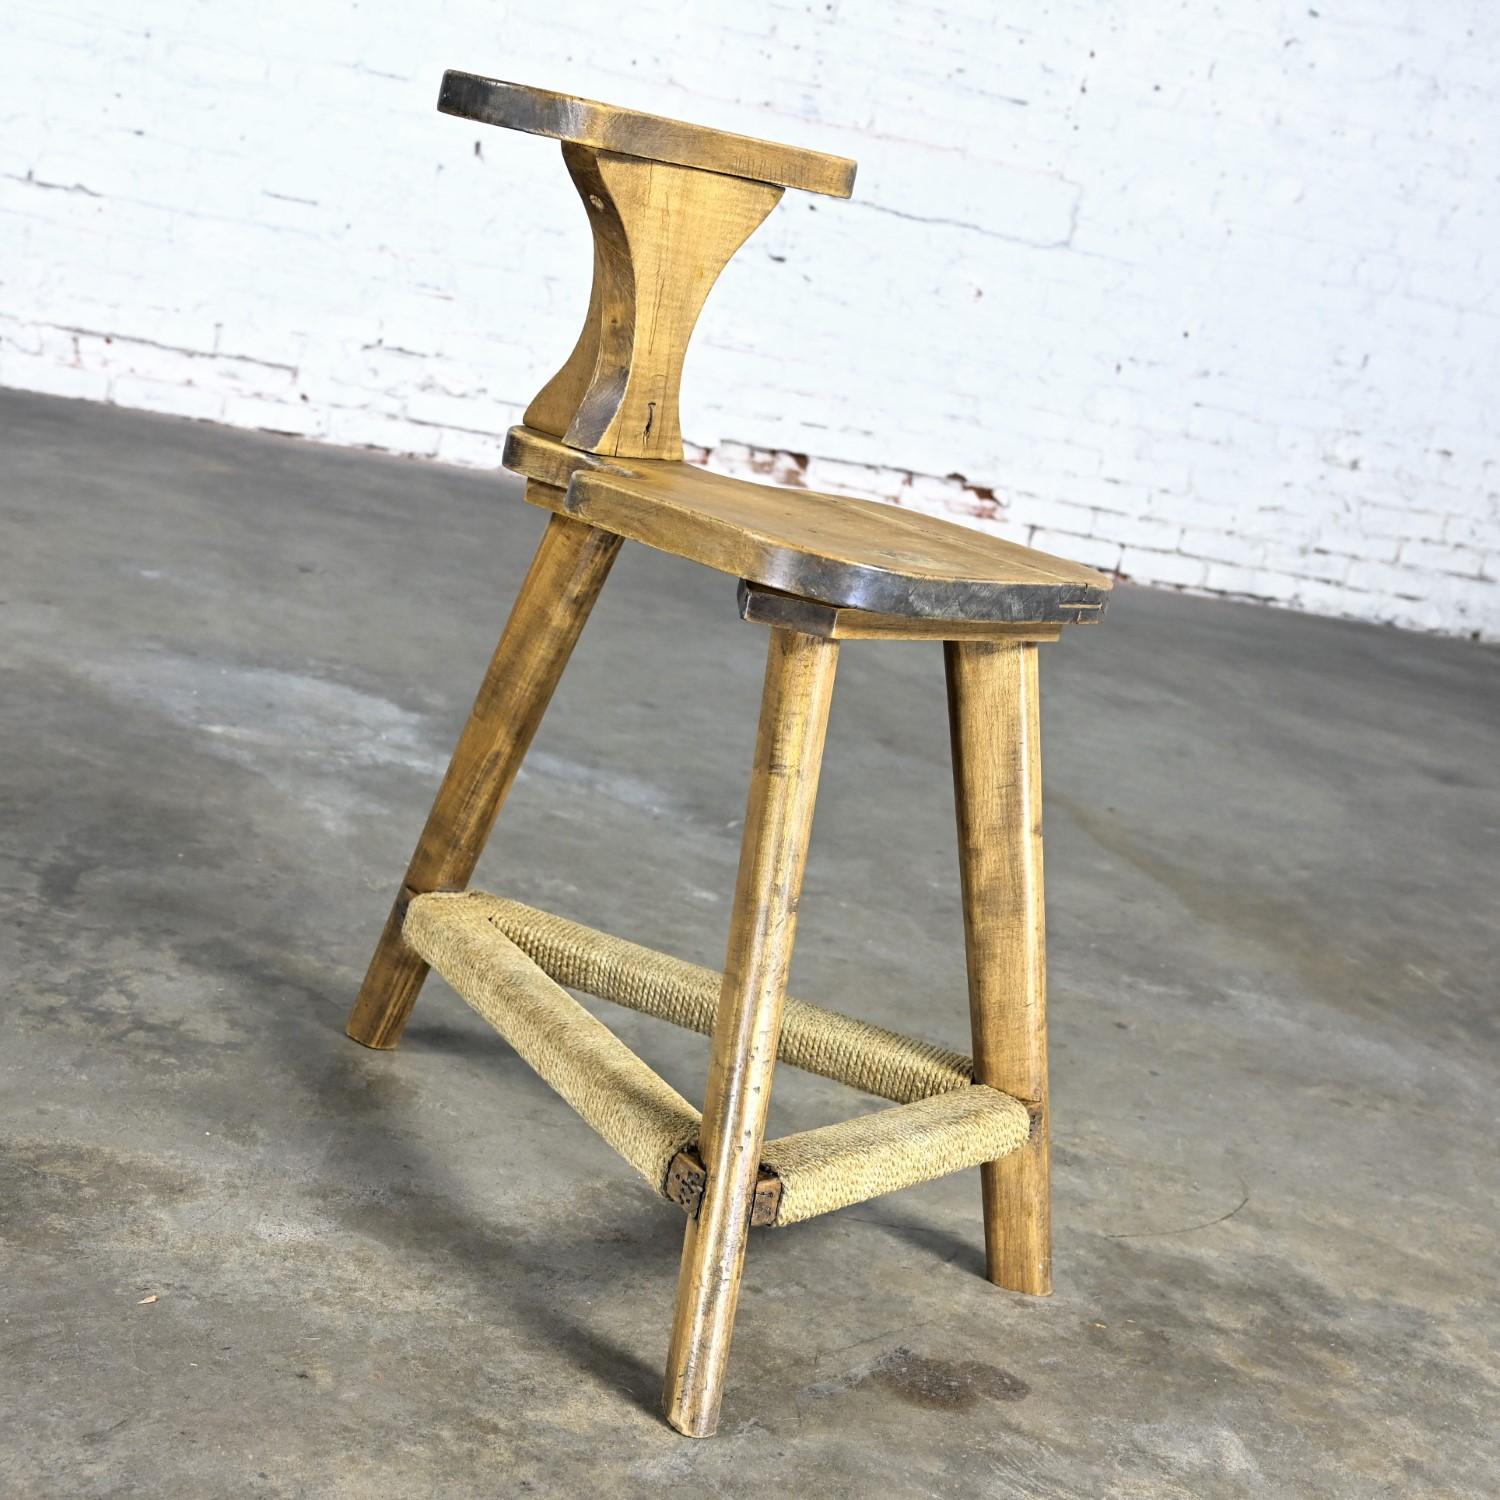 20th Century Rustic Distressed Maple Cockfighting Betting or Sporting Chair Tri-Leg Base For Sale